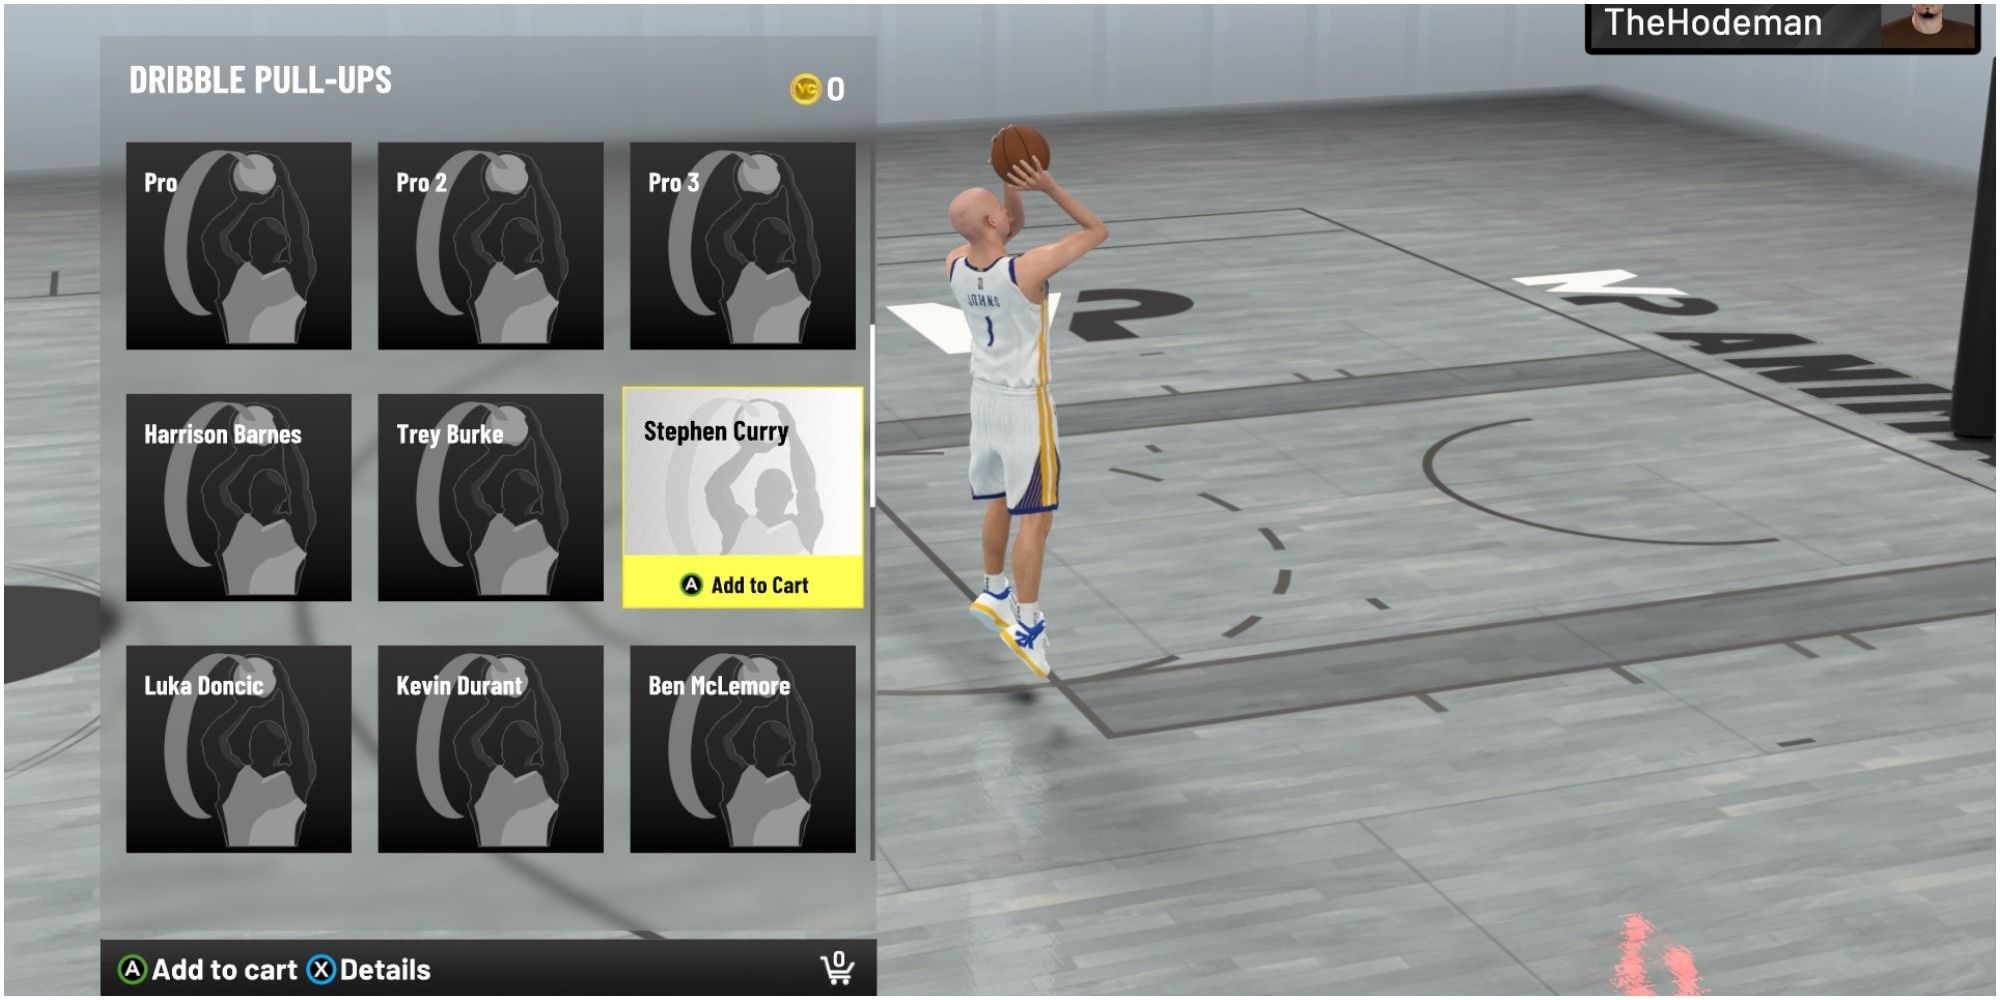 NBA 2K22 Selecting The Steph Curry Dribble Pull-Up